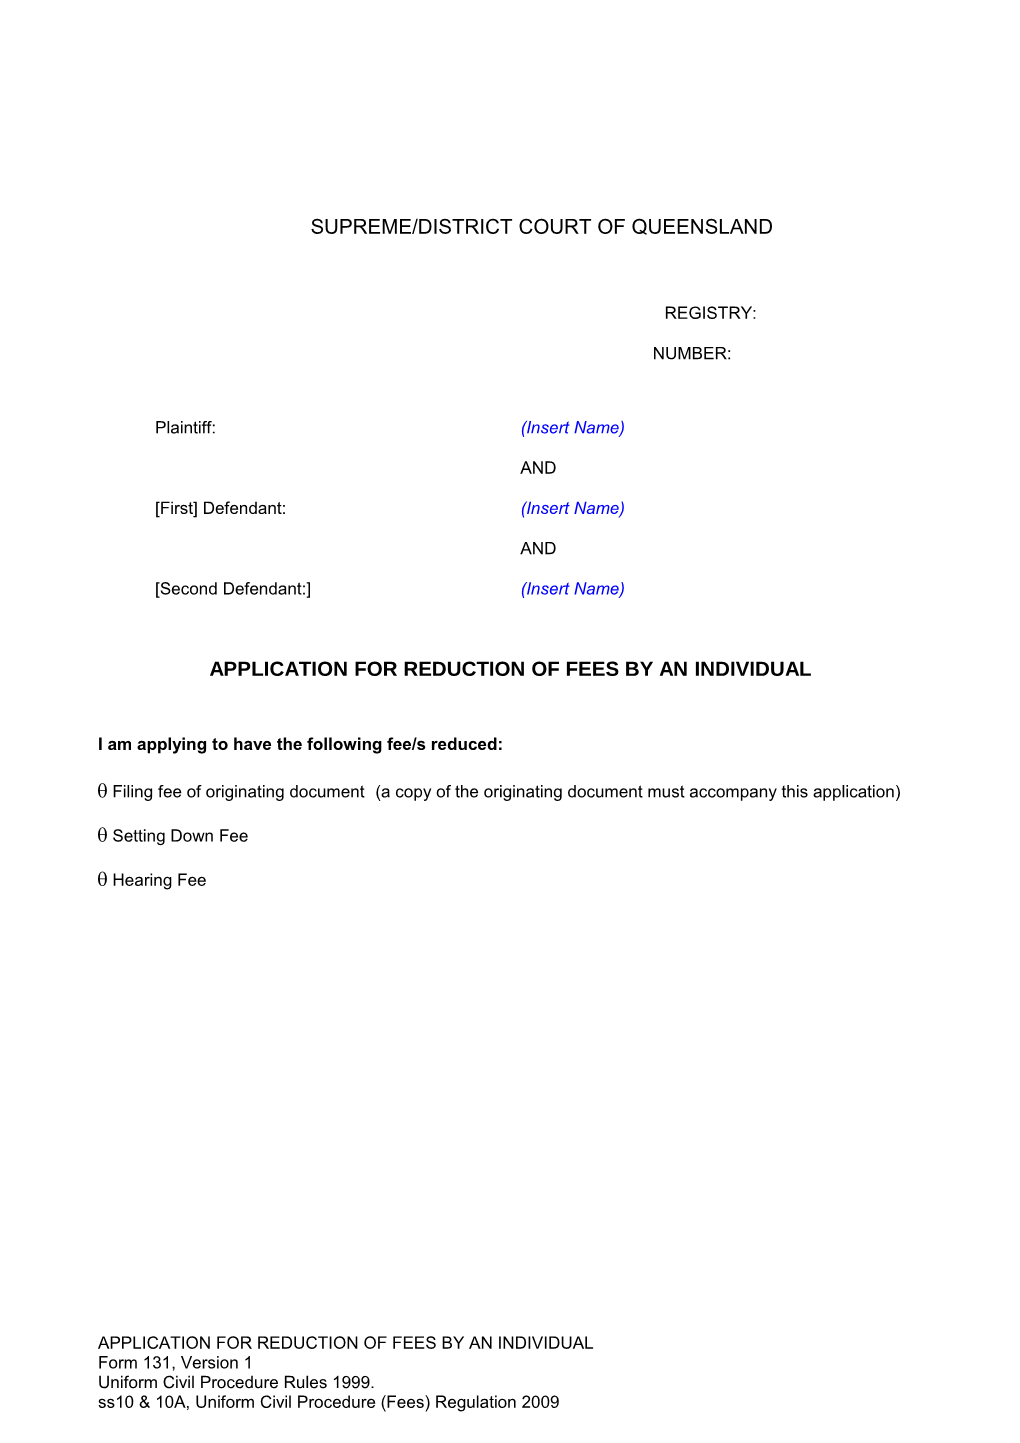 Application for Reduction of Fees by an Individual